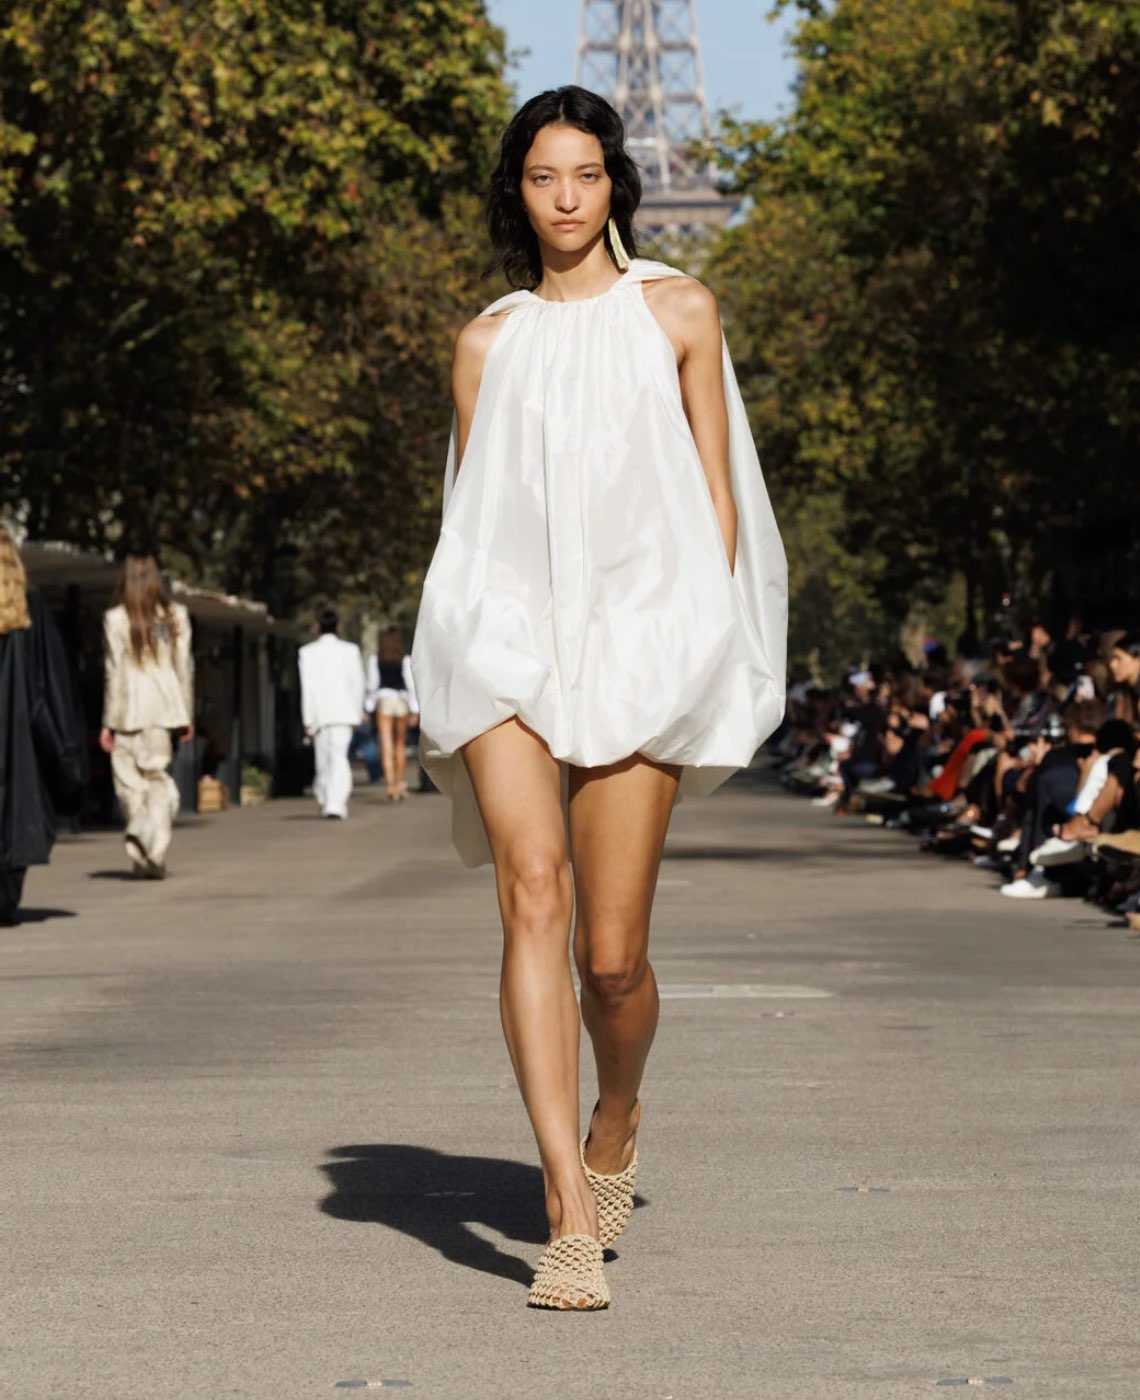 model in a white dress on a runway